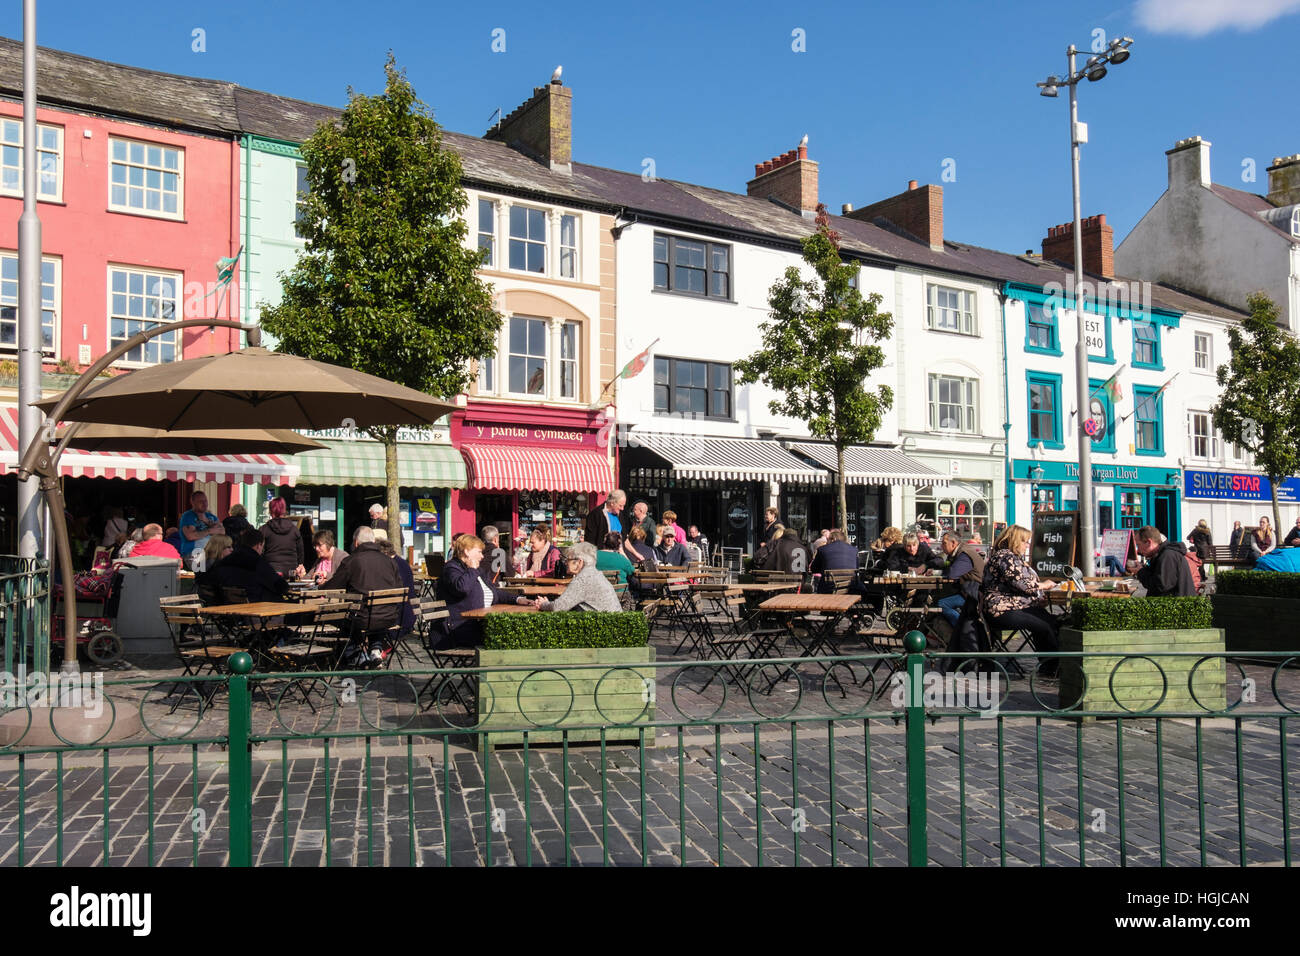 People dining out in sunshine in town square street cafe. Caernarfon, Gwynedd, North Wales, UK, Britain Stock Photo